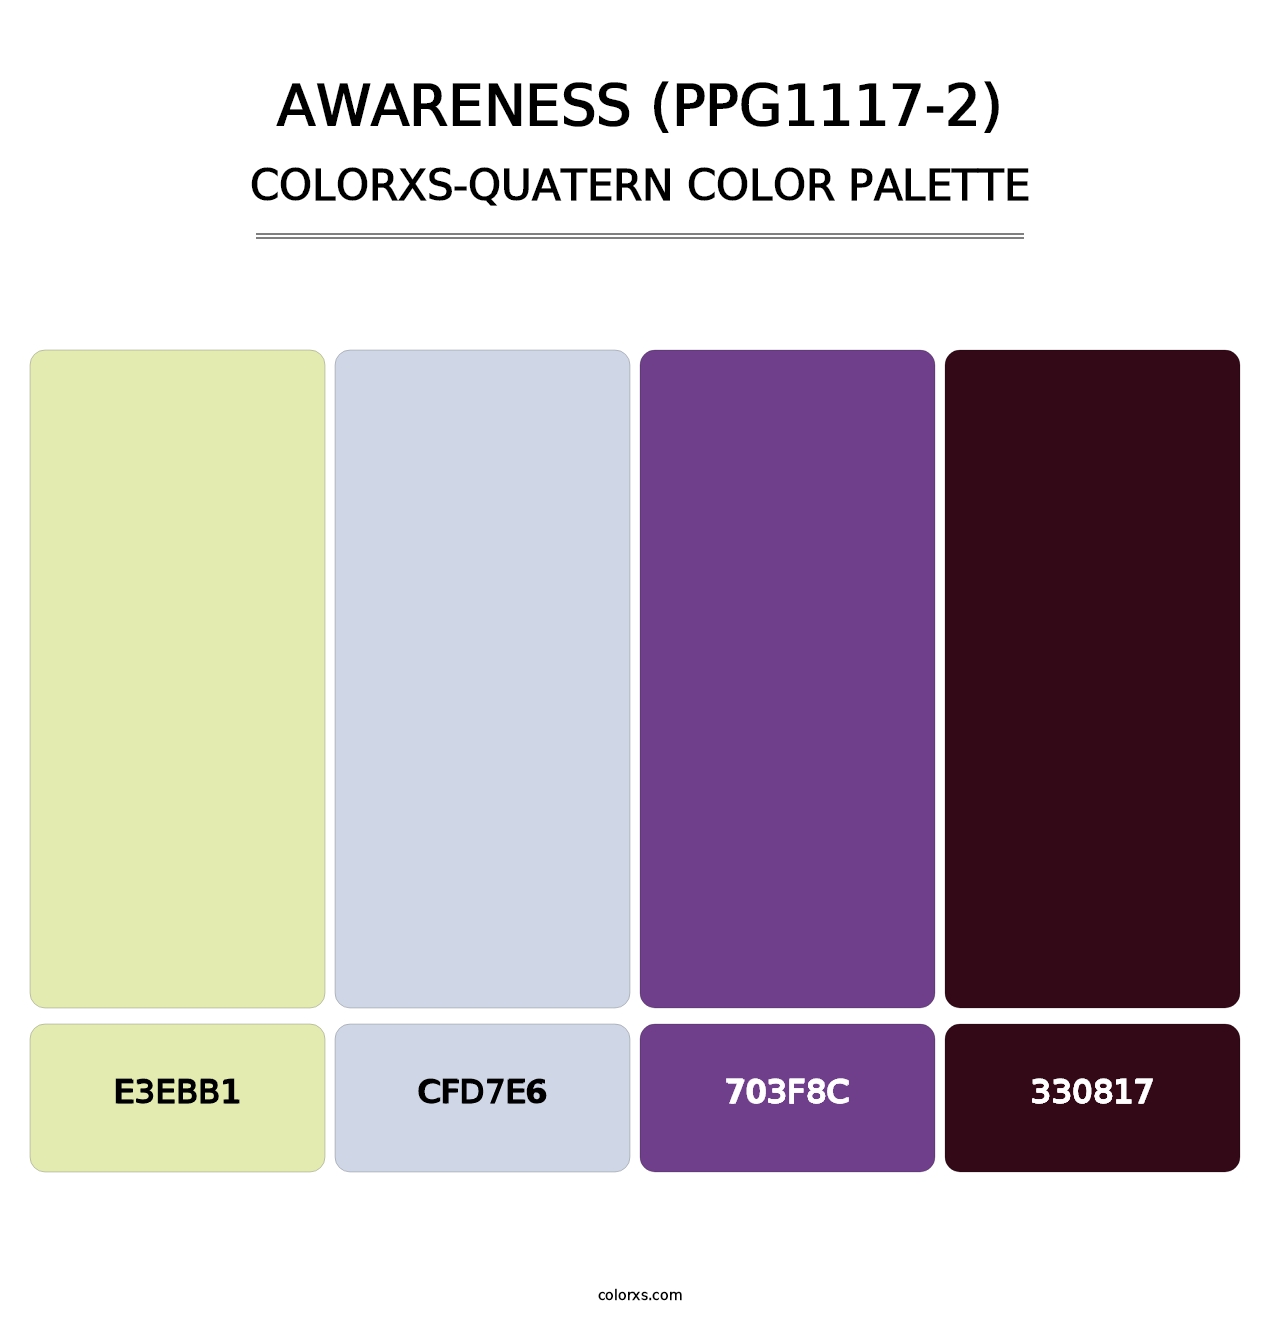 Awareness (PPG1117-2) - Colorxs Quatern Palette